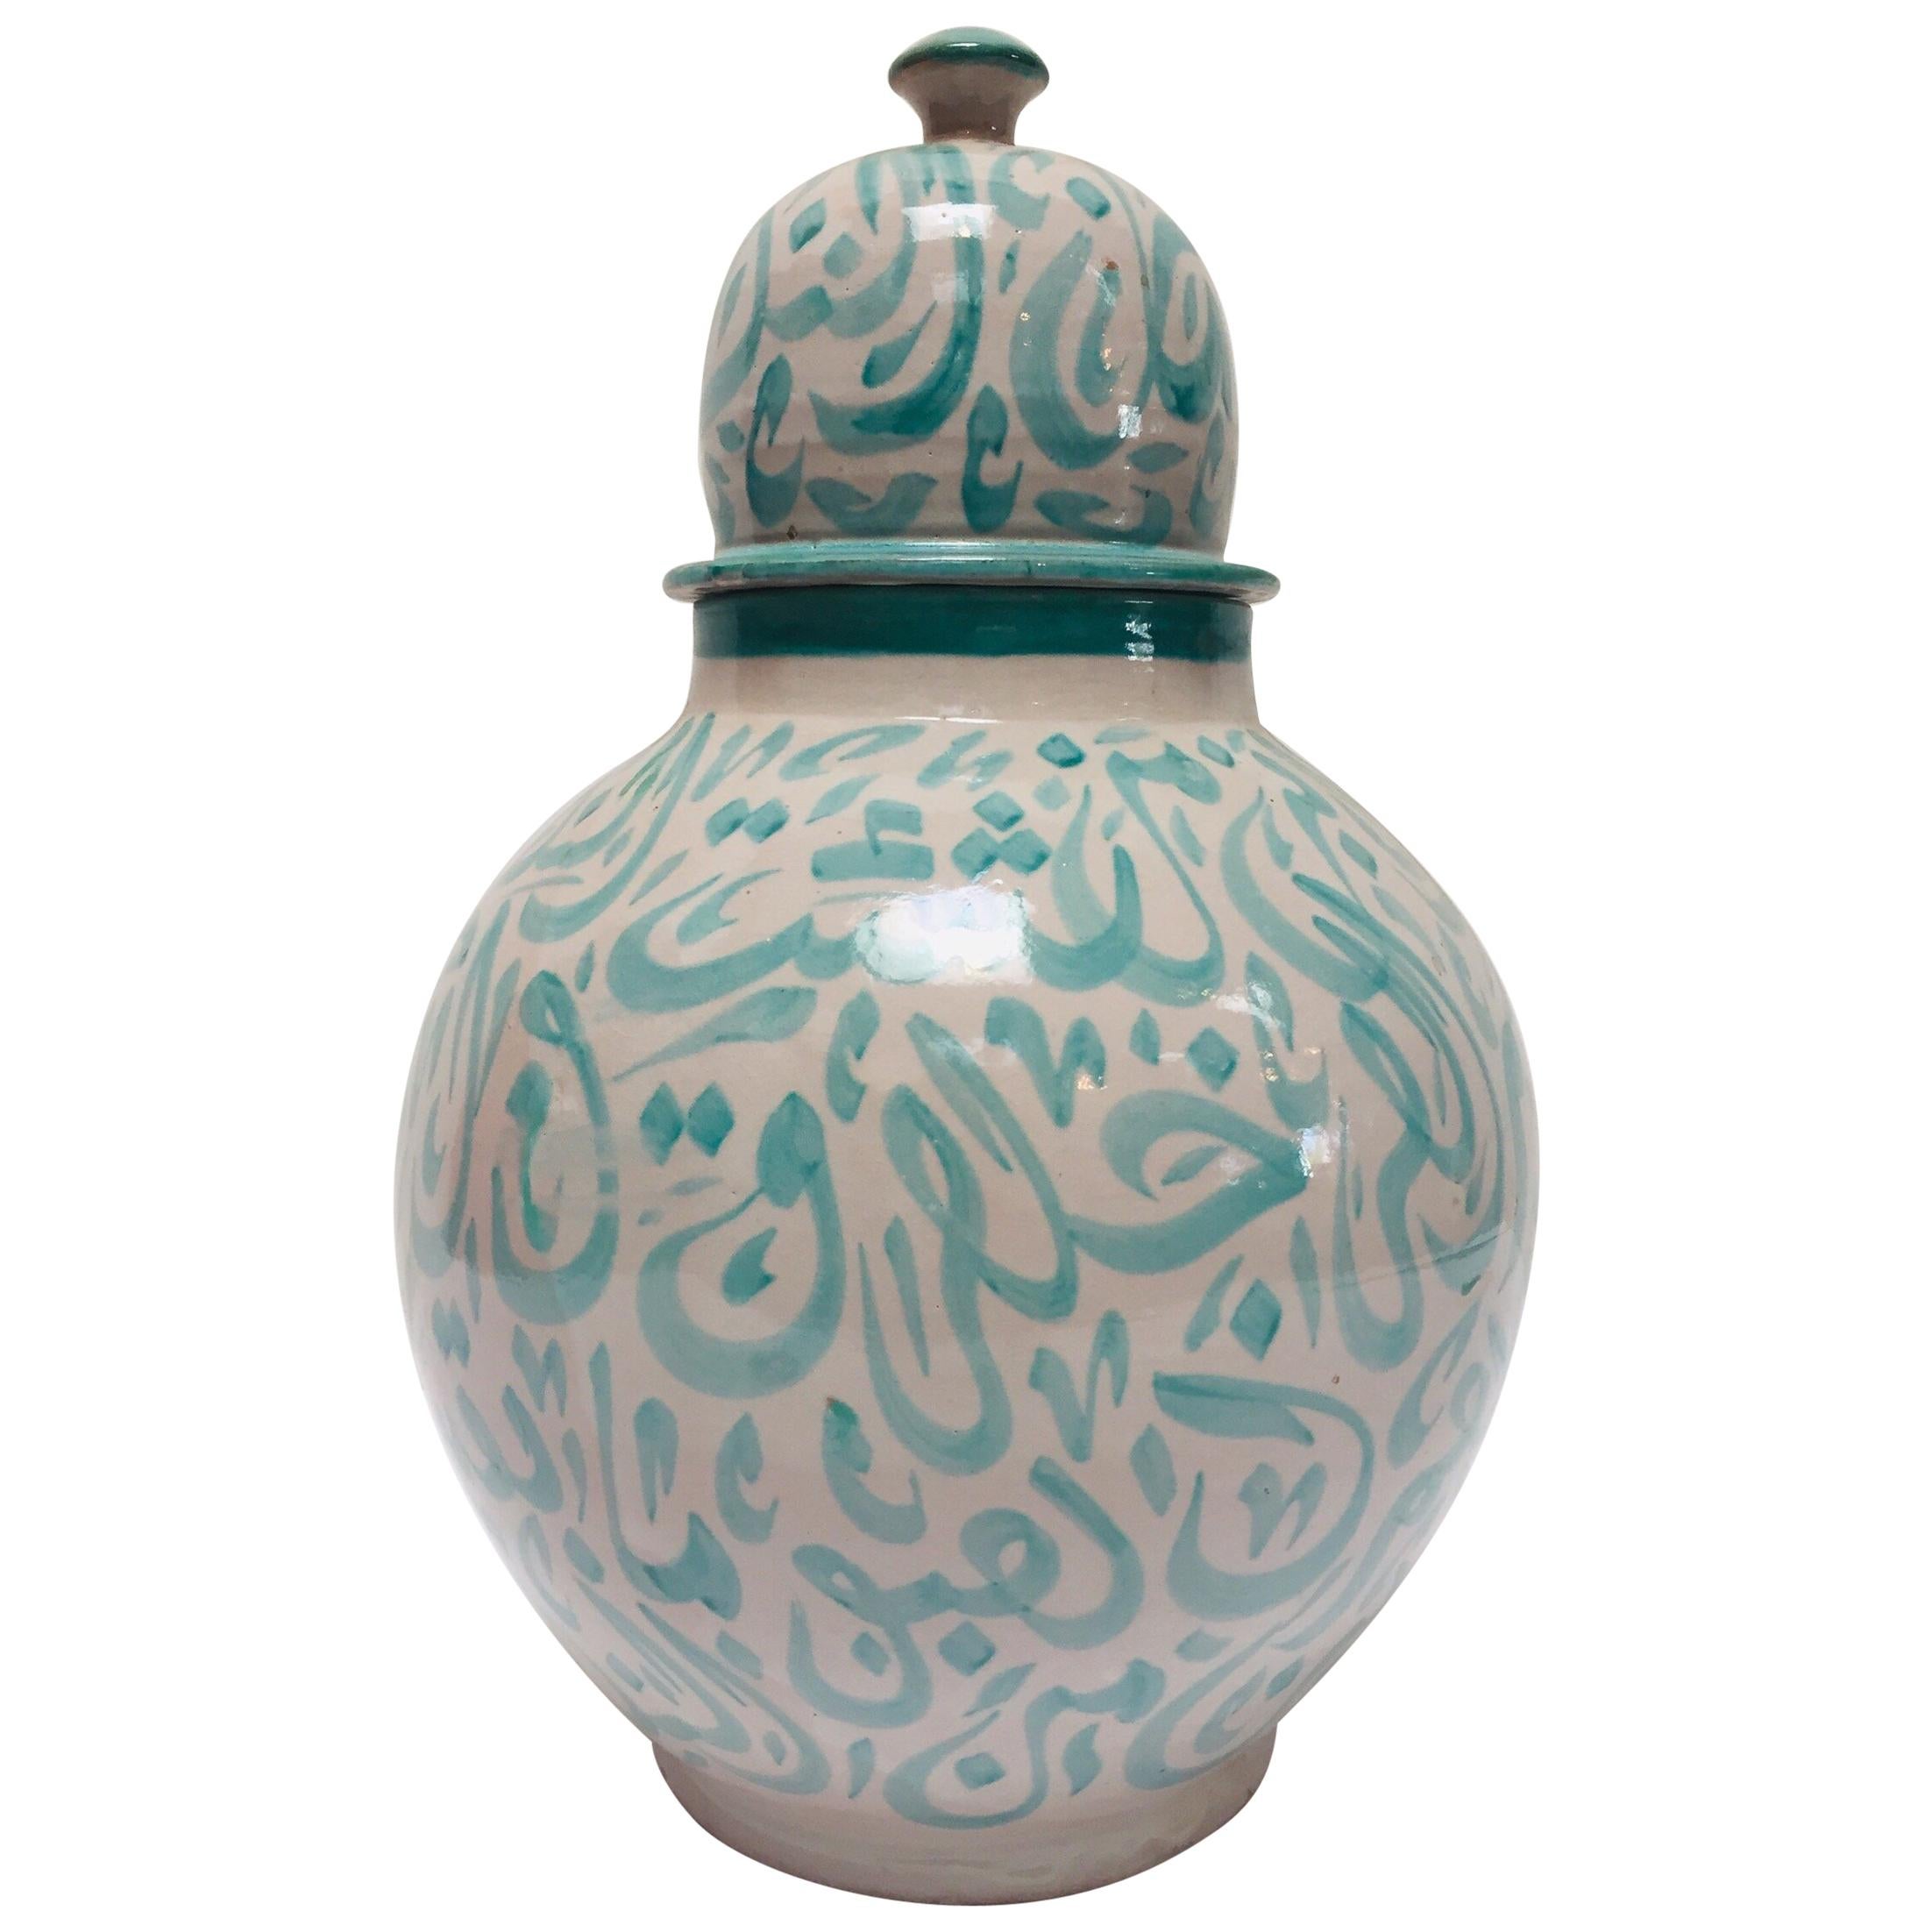 Moroccan Ceramic Lidded Urn from Fez with Arabic Calligraphy Lettrism Writing